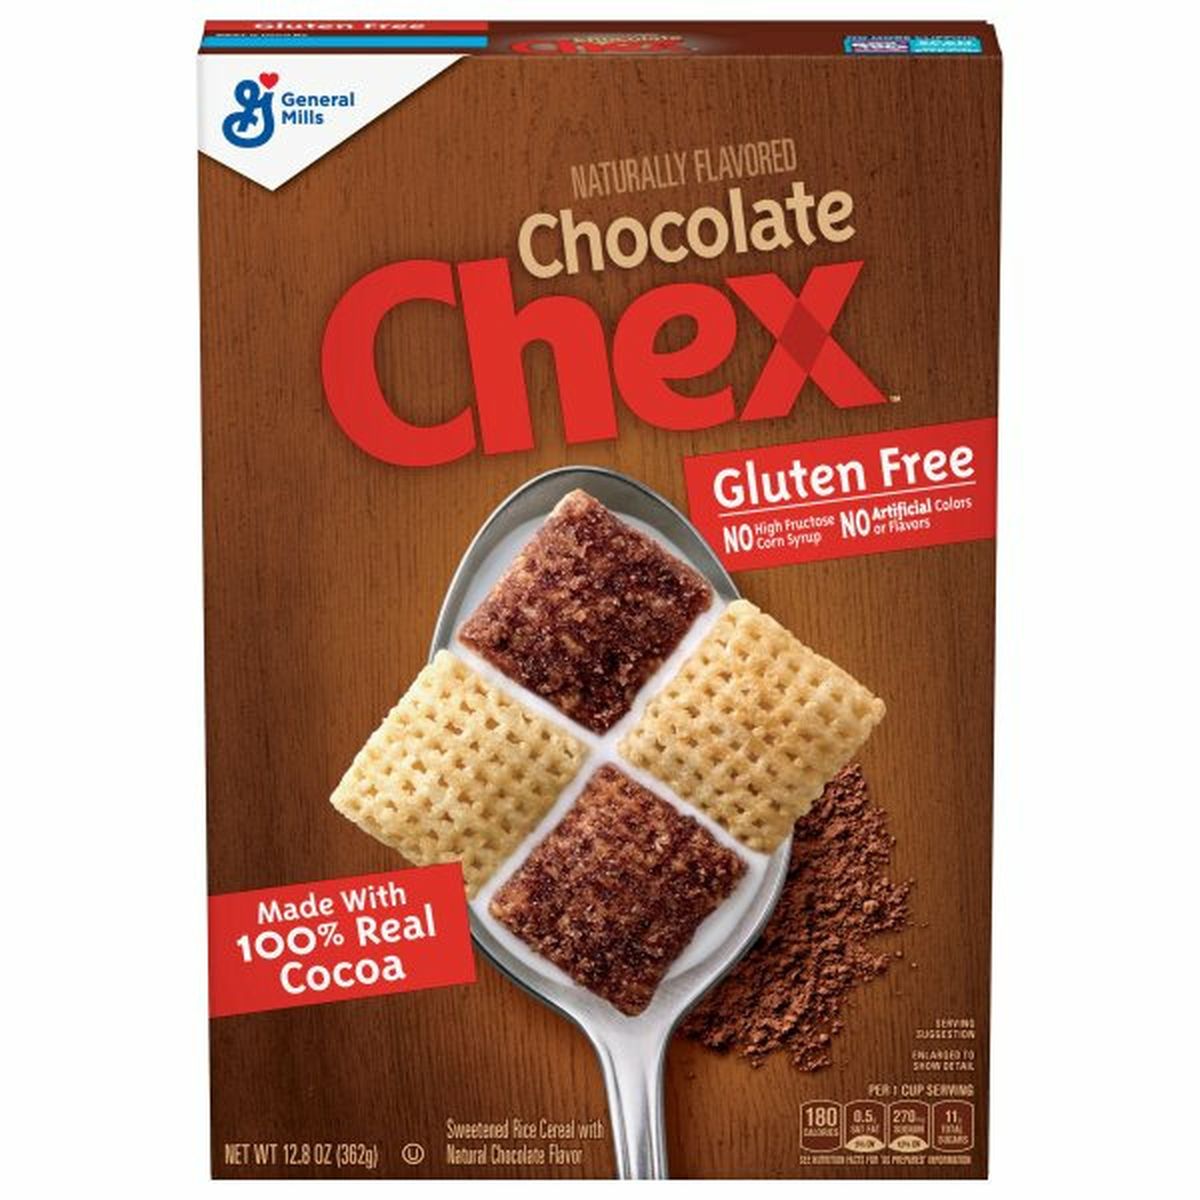 Calories in Chex Cereal, Gluten Free, Chocolate